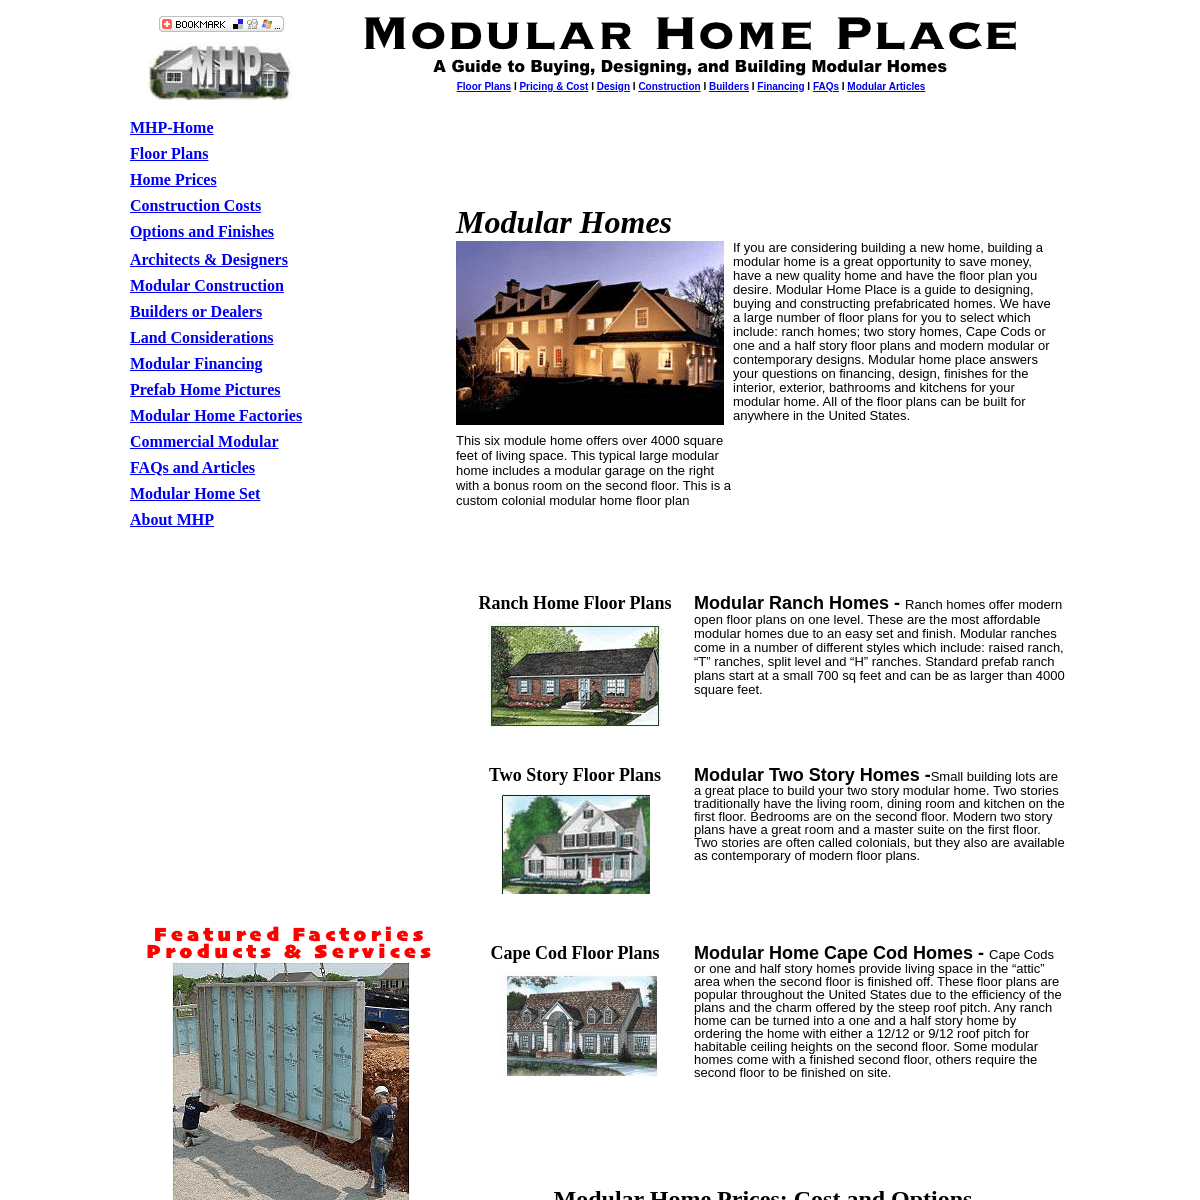 A complete backup of modularhomeplace.com